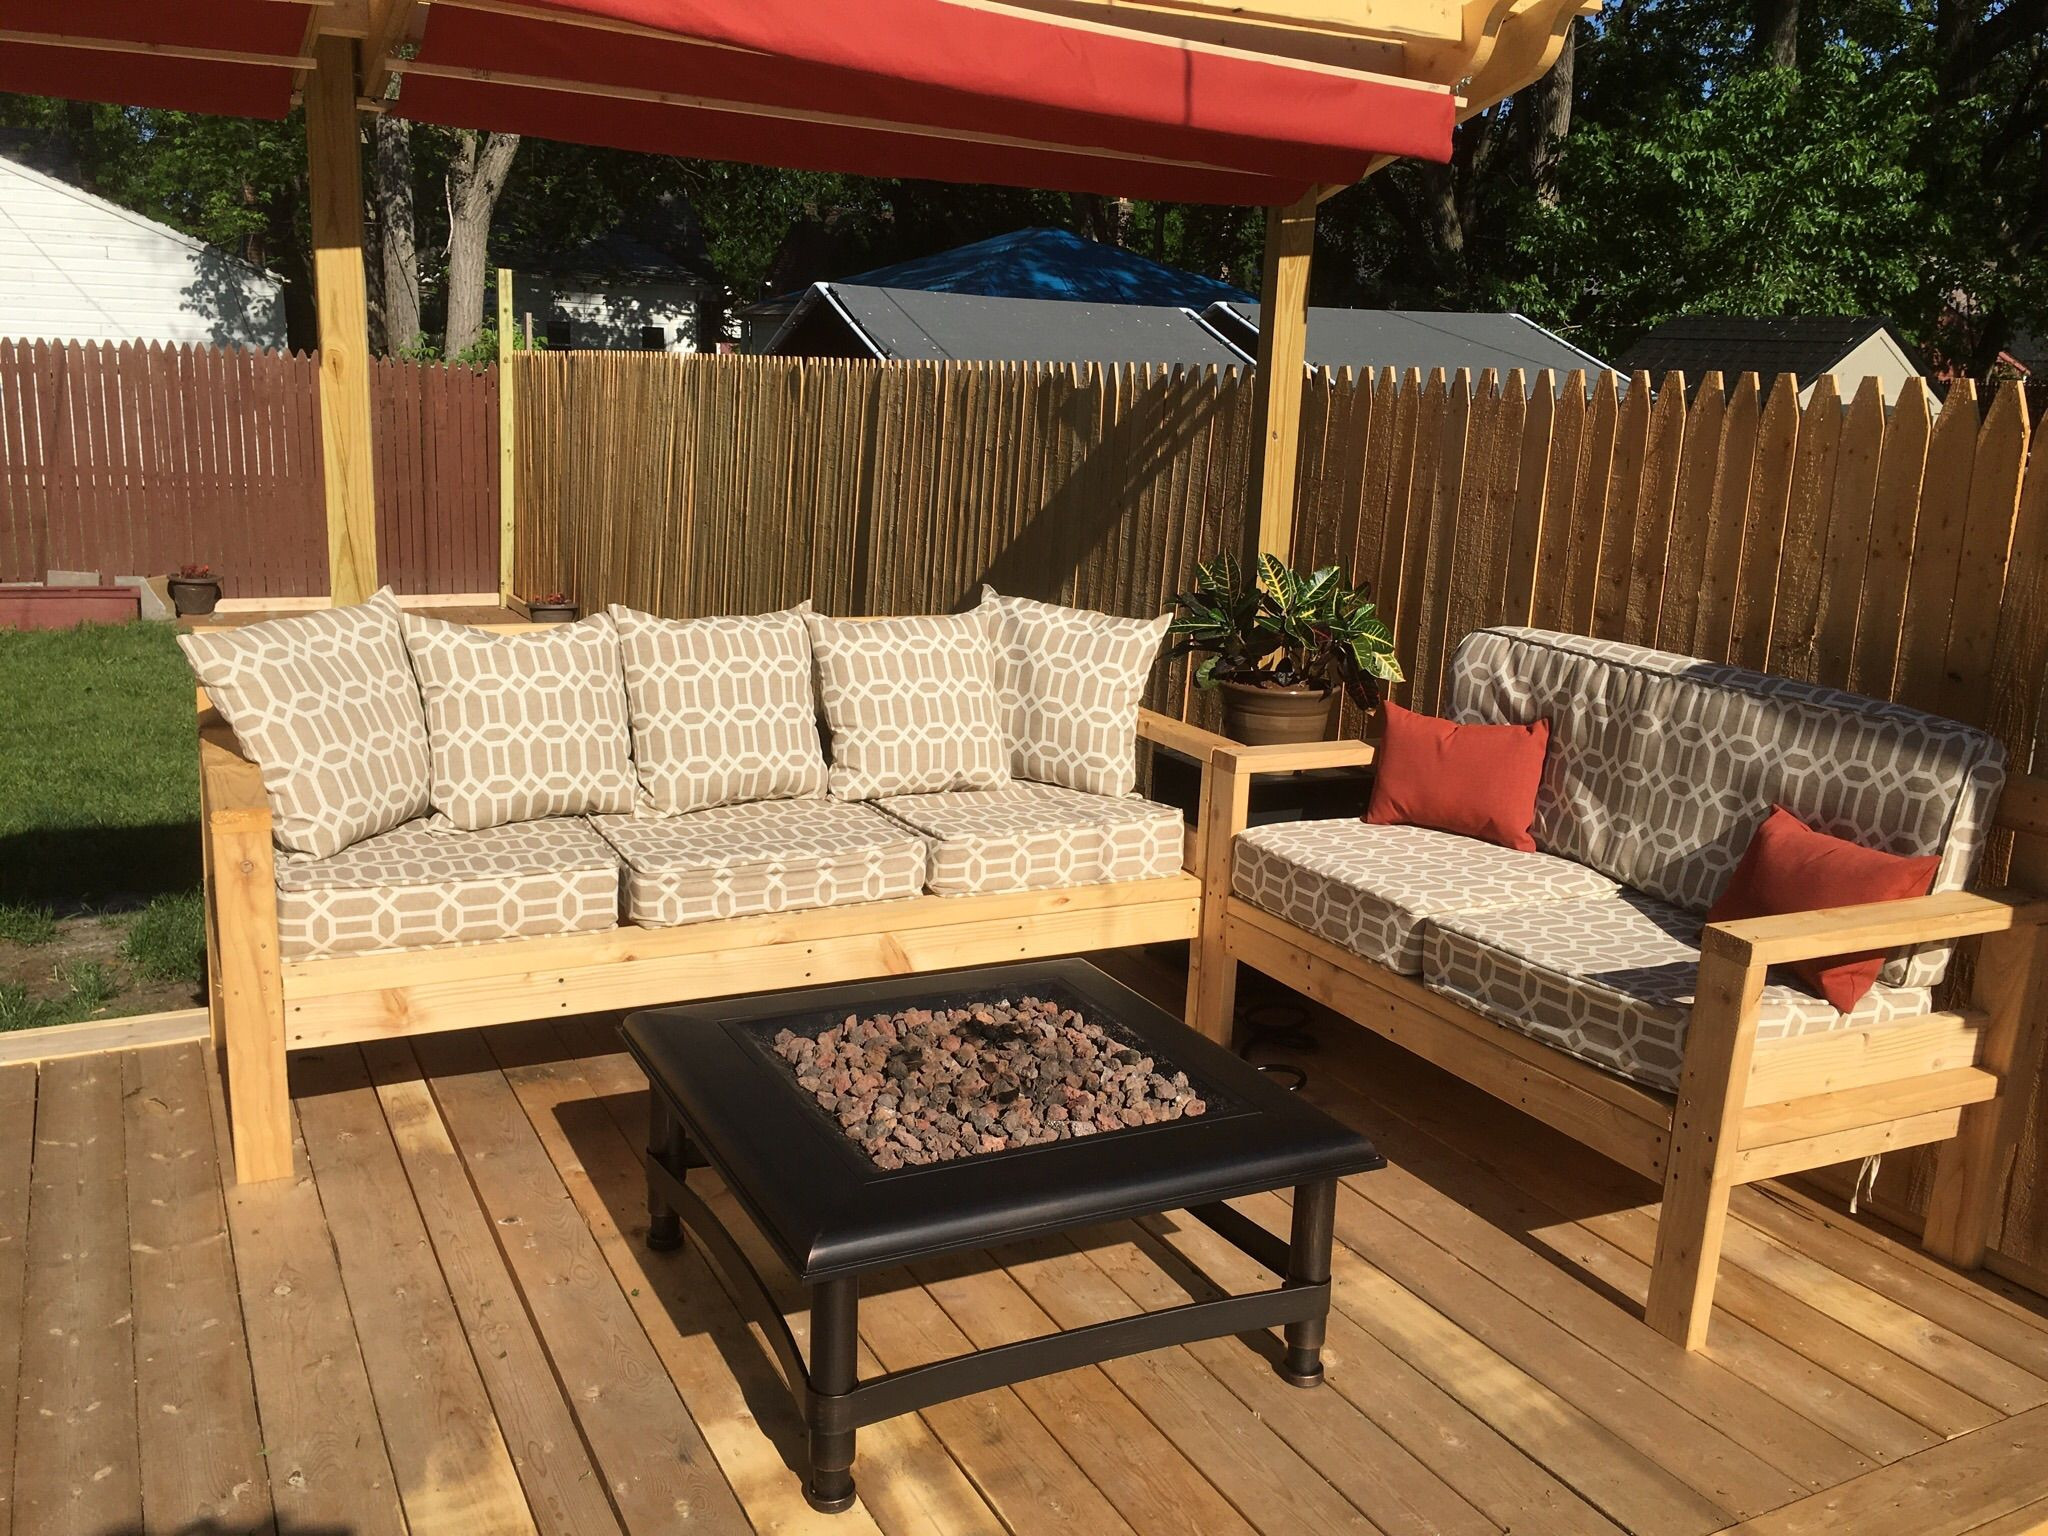 DIY Outdoor Furniture Ana White
 Sectional seating